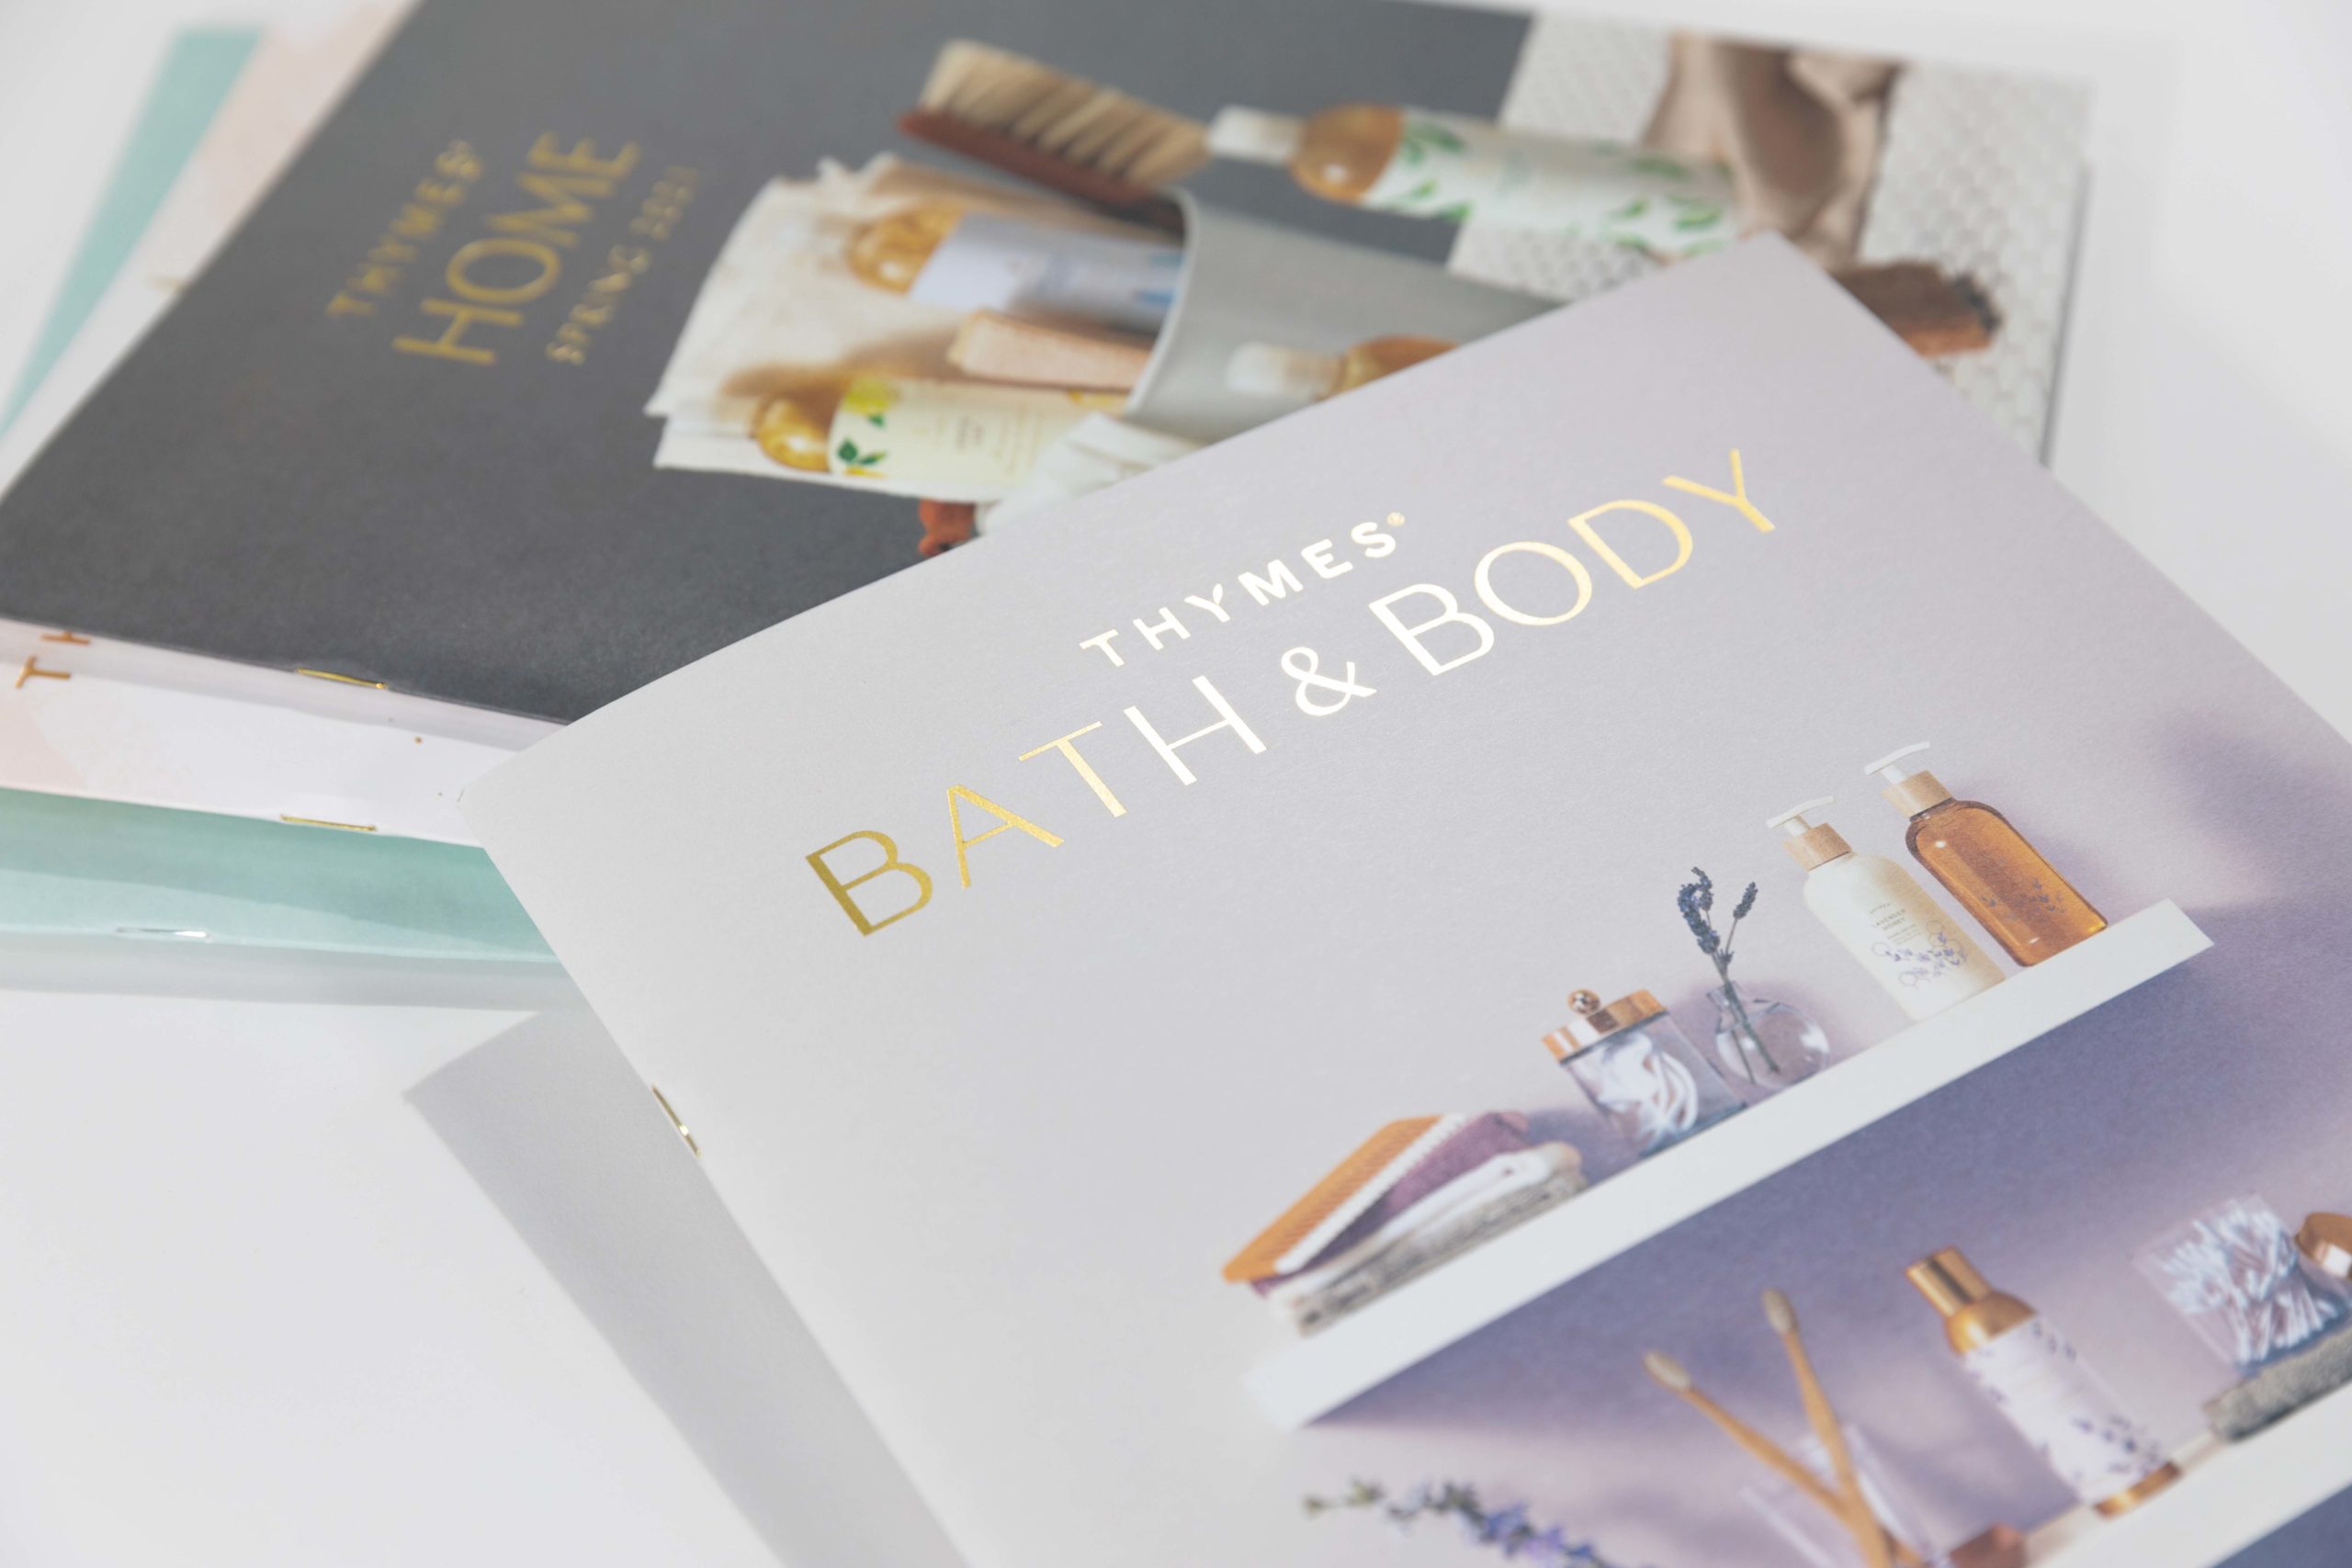 Thymes bath and body catalog with gold foil and saddle stiching